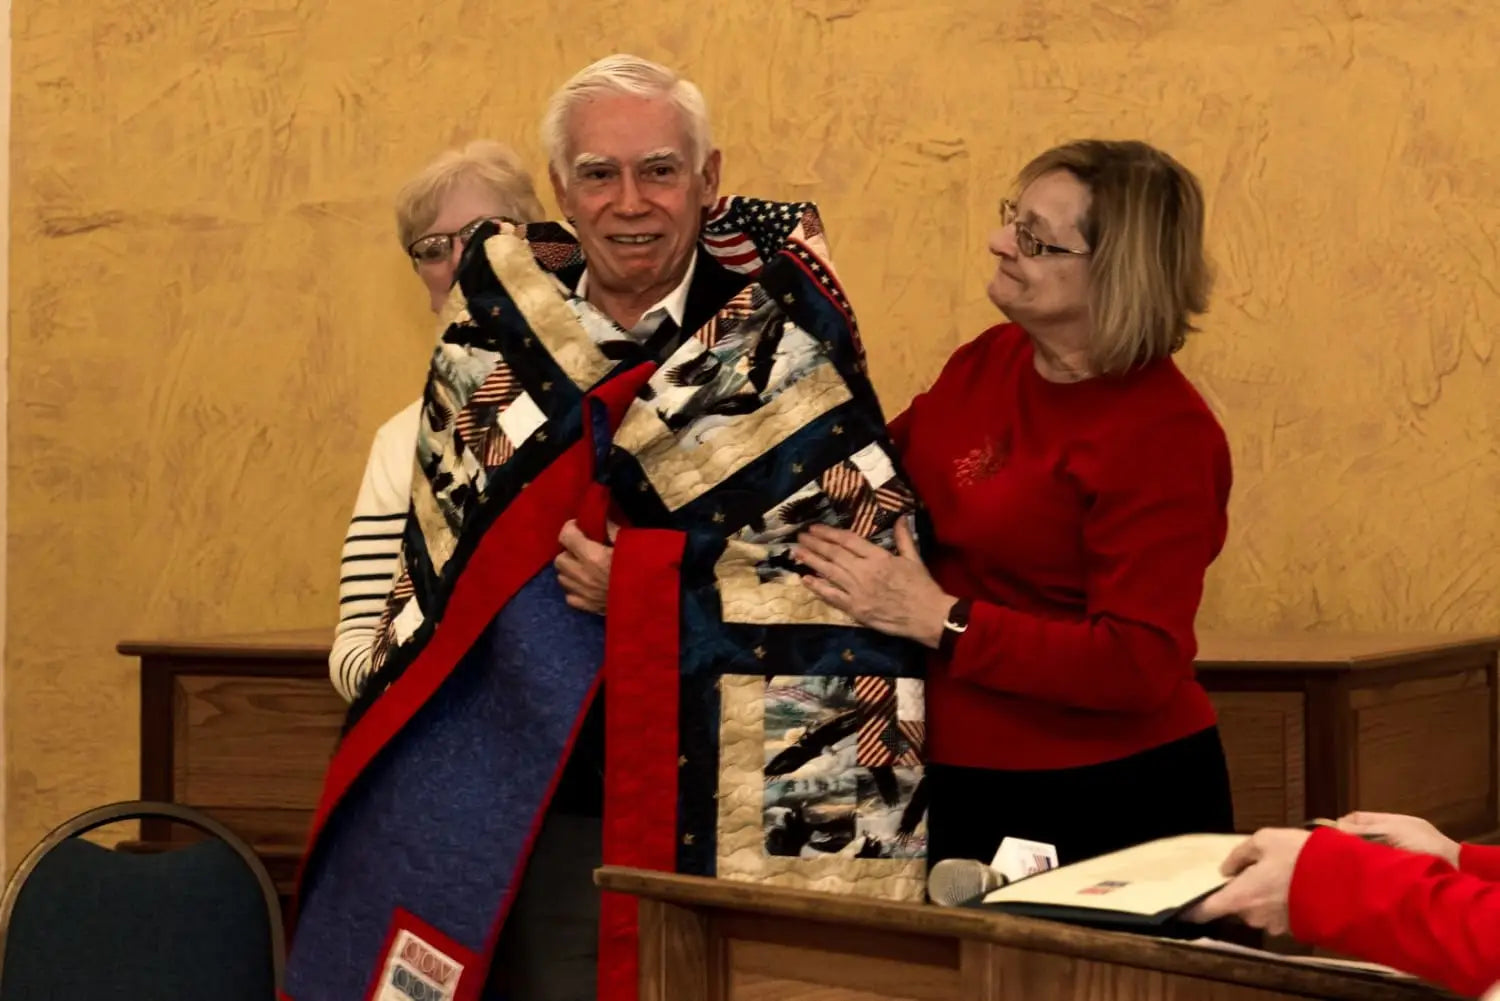 Join us in supporting Quilts of Valor